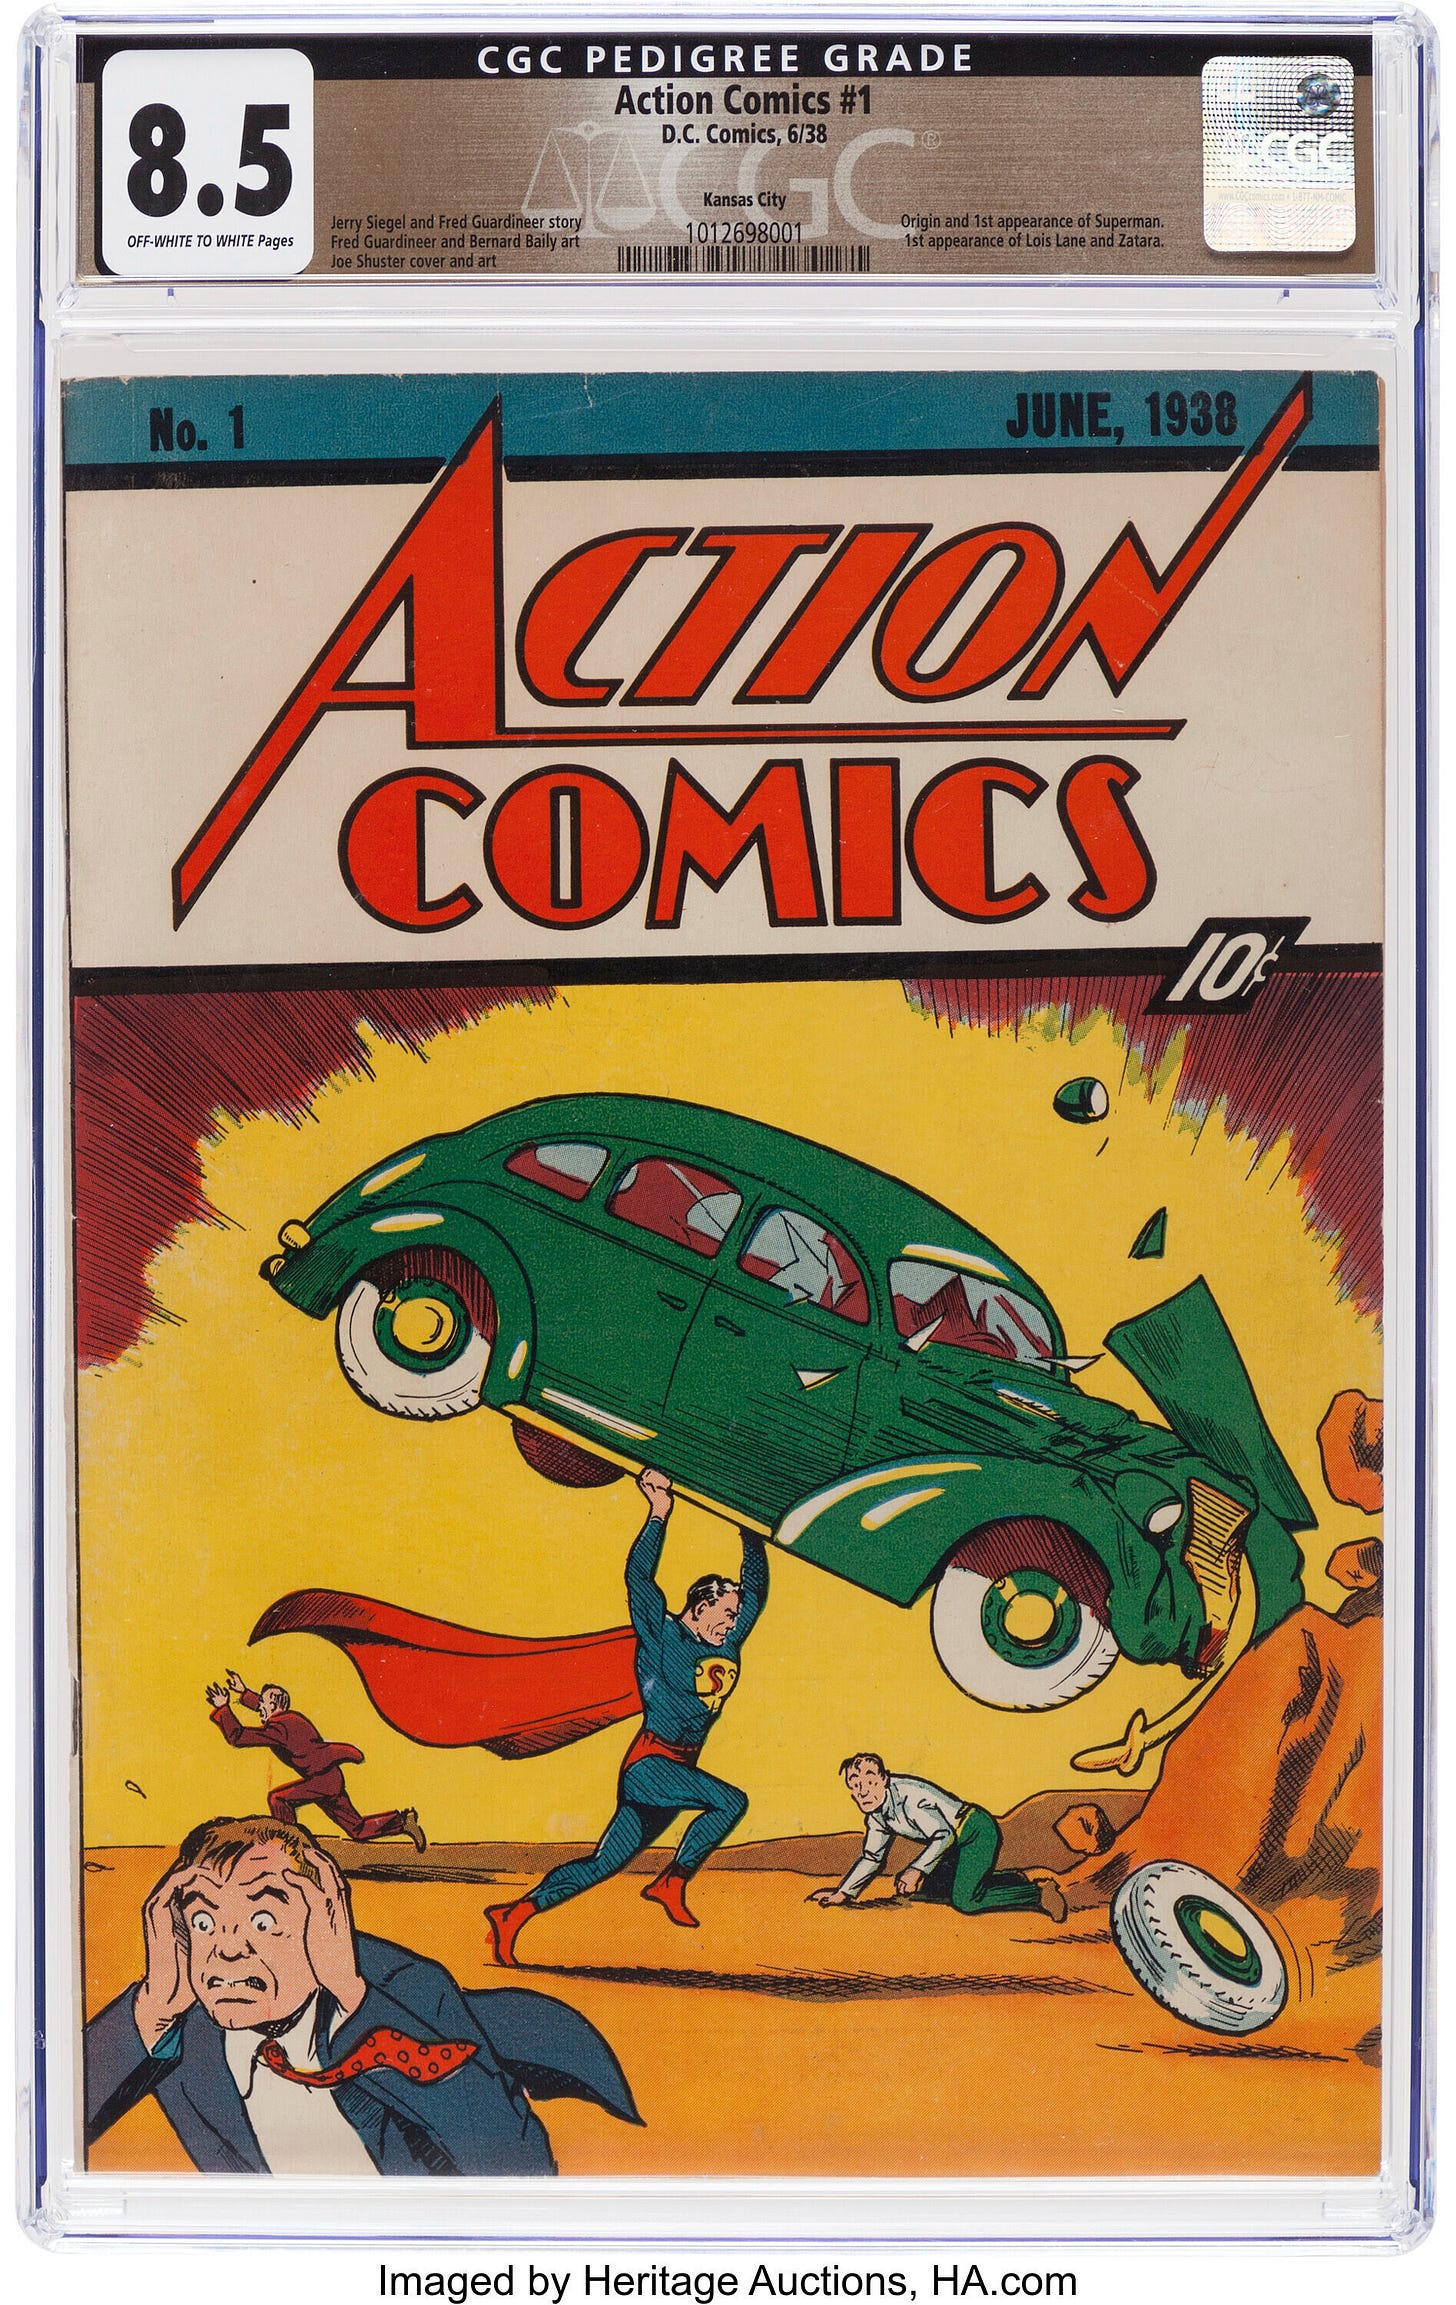 A copy of Action Comics No. 1, the comic book that introduced Superman to the world in 1938.